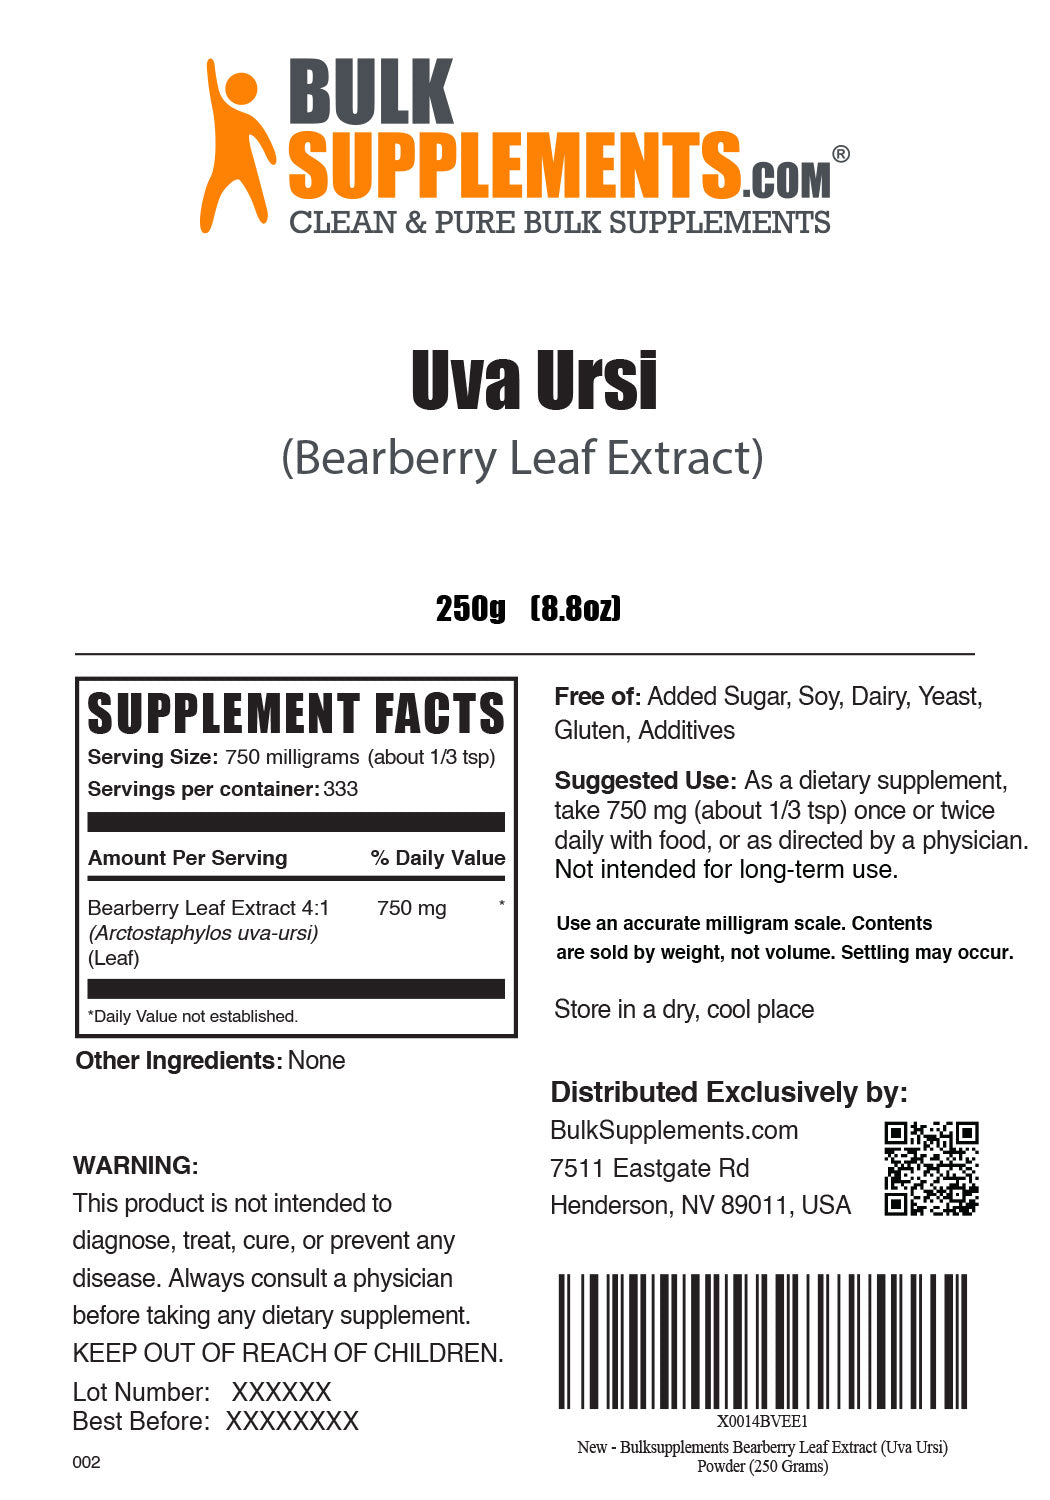 Bearberry Leaf Extract Uva Ursi Supplement Facts and Serving Size